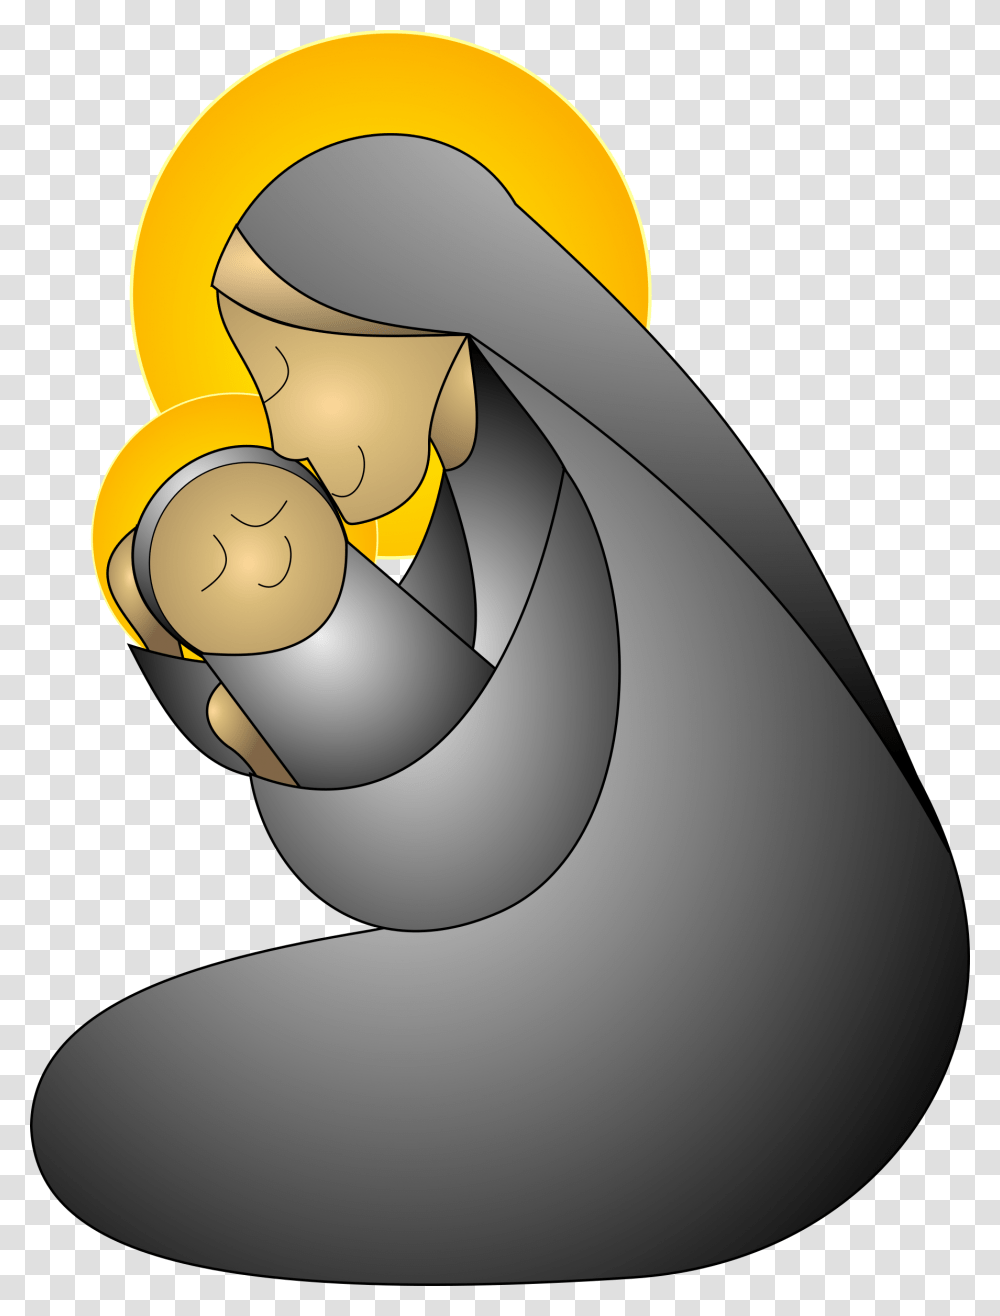 Second Group Baby Image Poetry About Mother In Urdu, Lamp, Photography Transparent Png